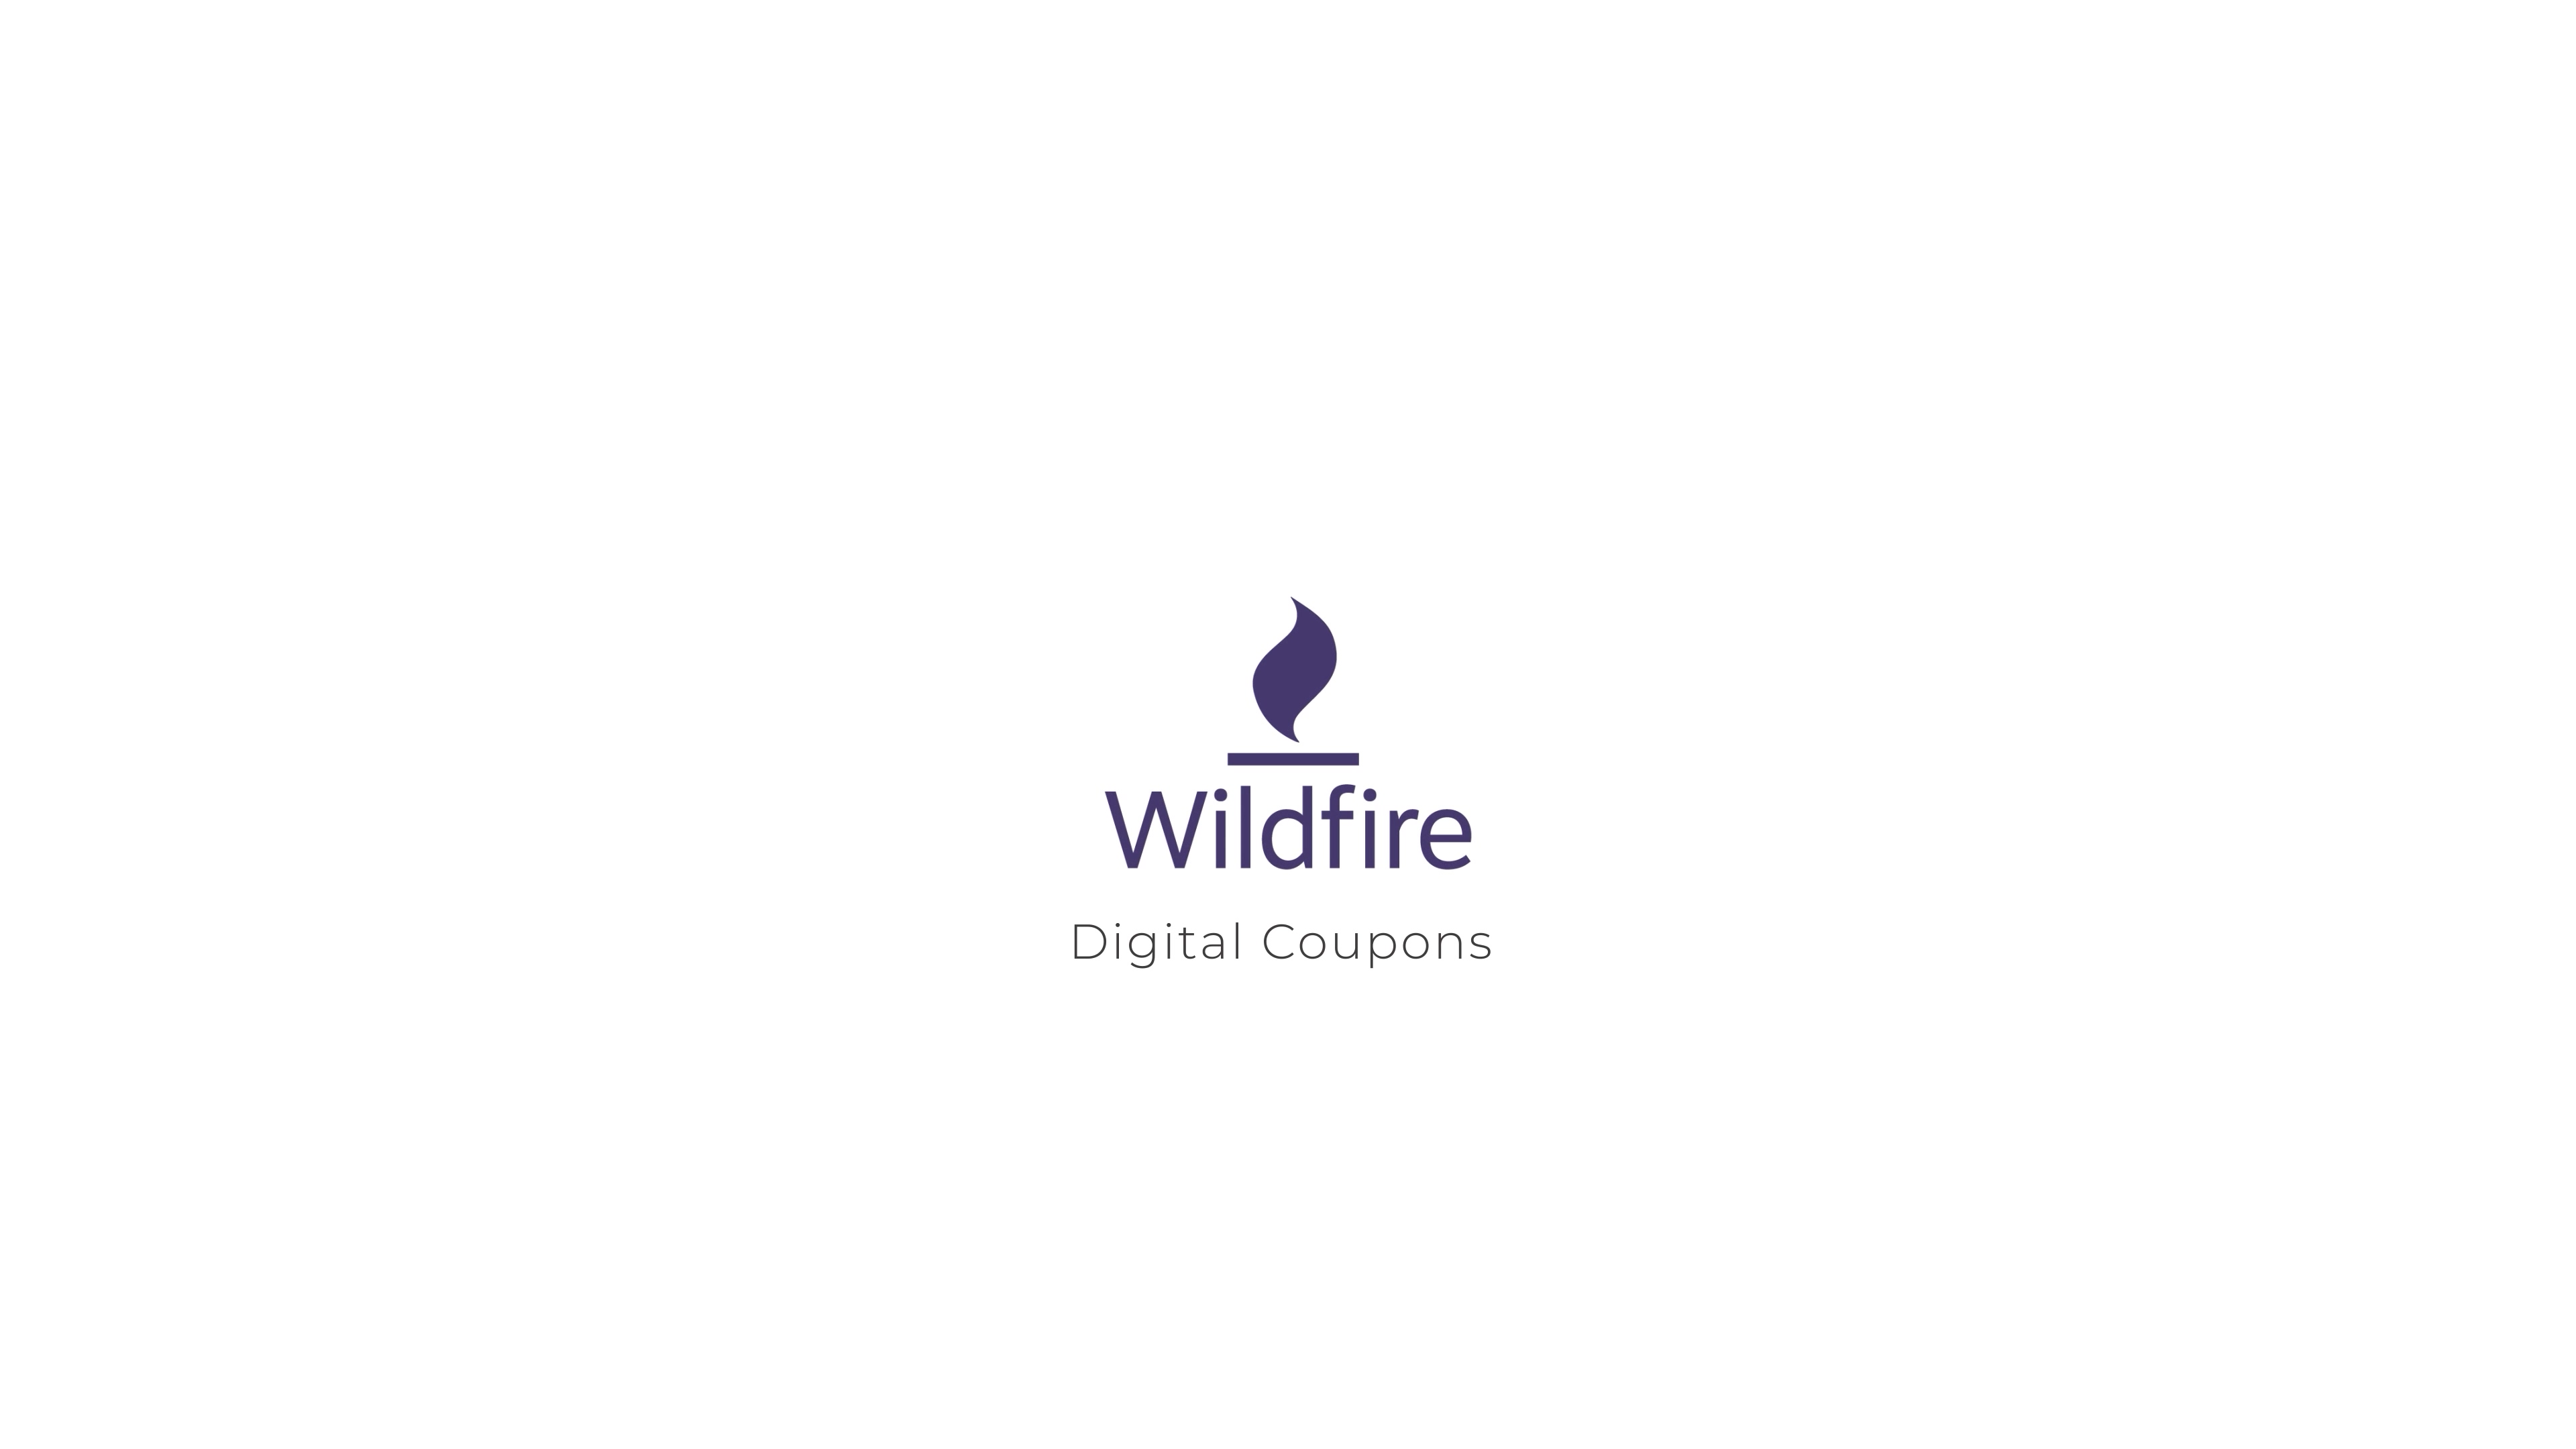 Wildfire | Digital Coupons [no captions]